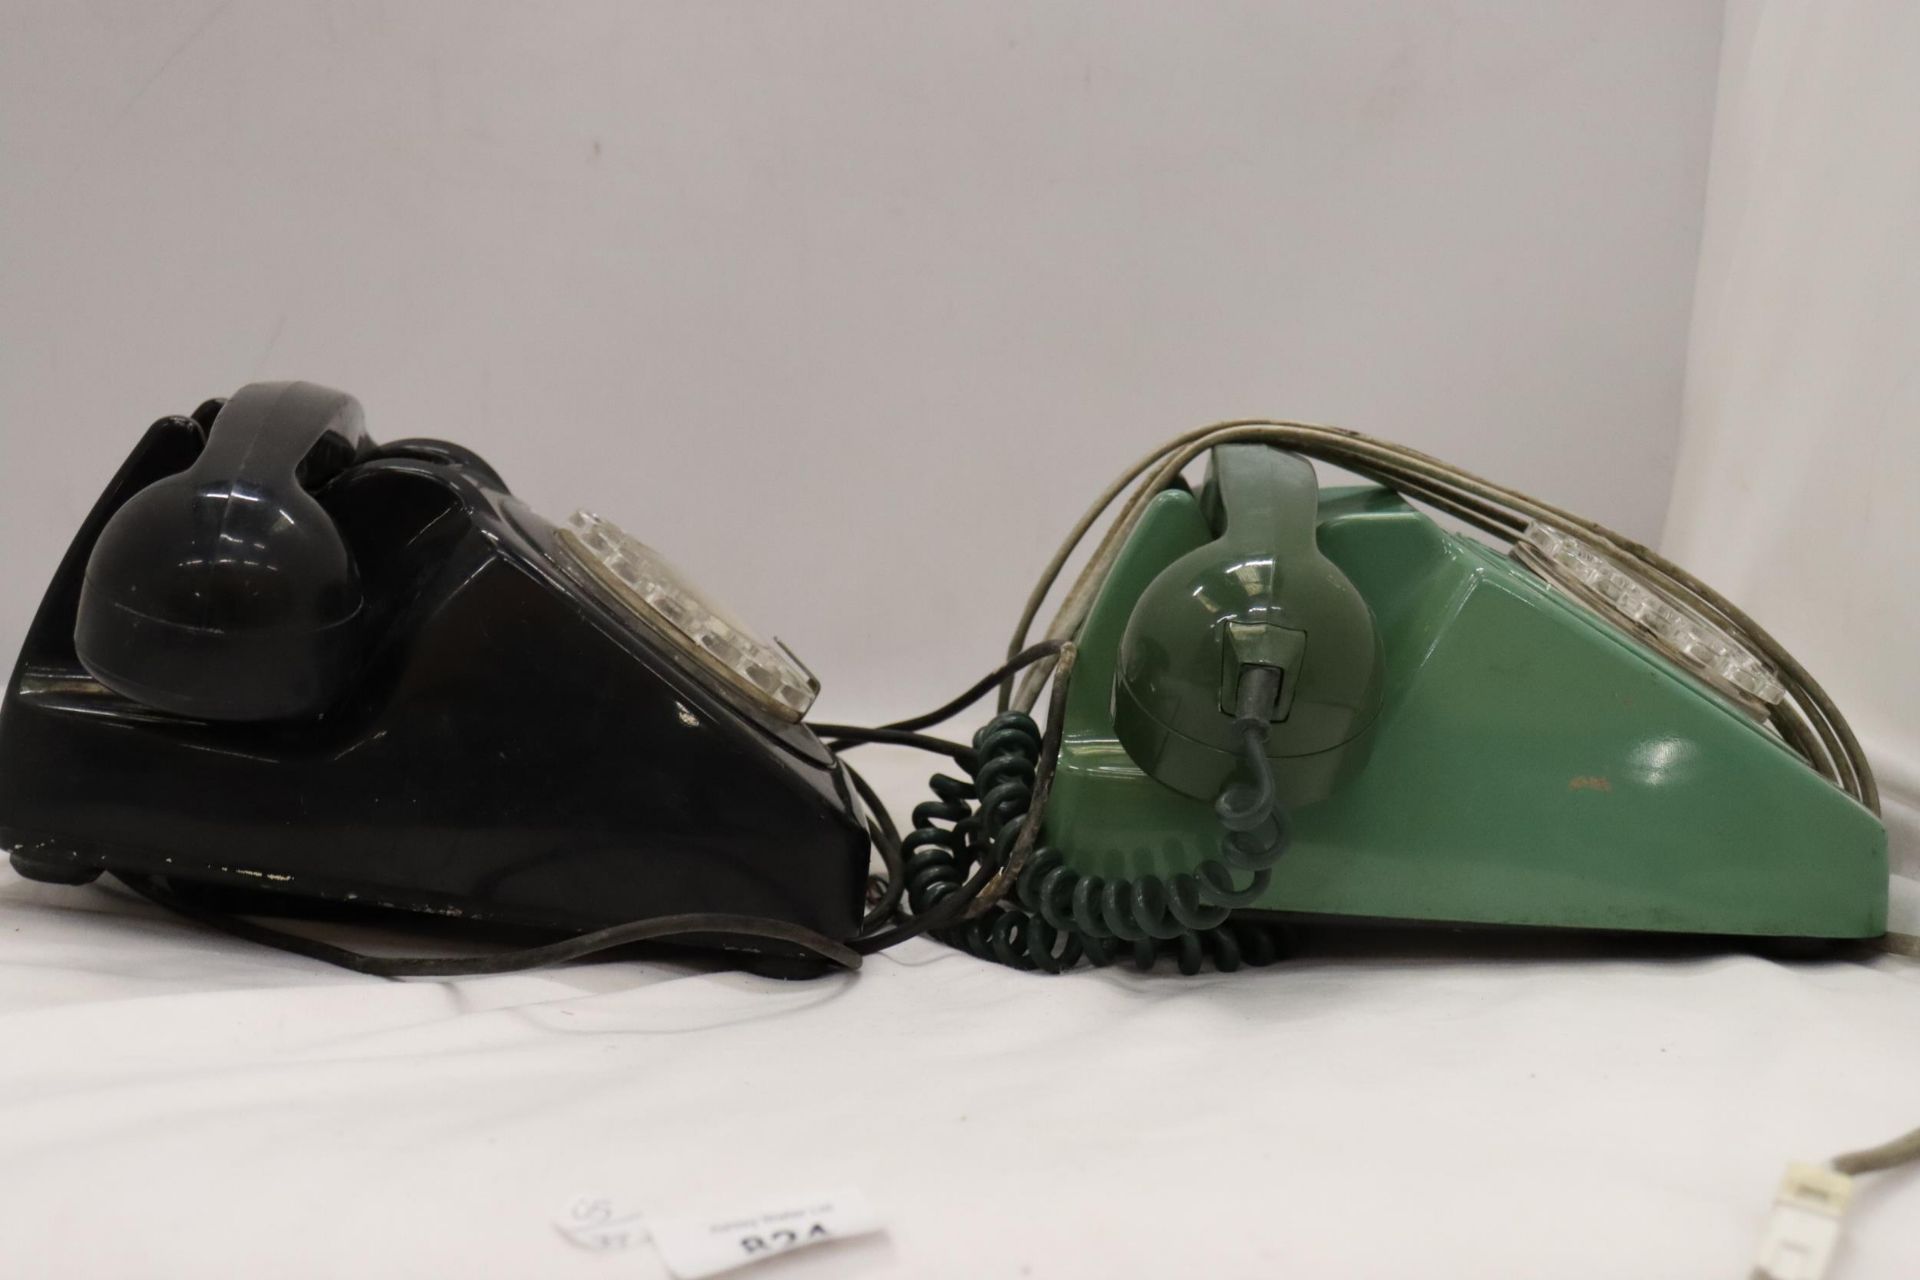 TWO VINTAGE BLACK AND GREEN TELEPHONES - Image 5 of 5